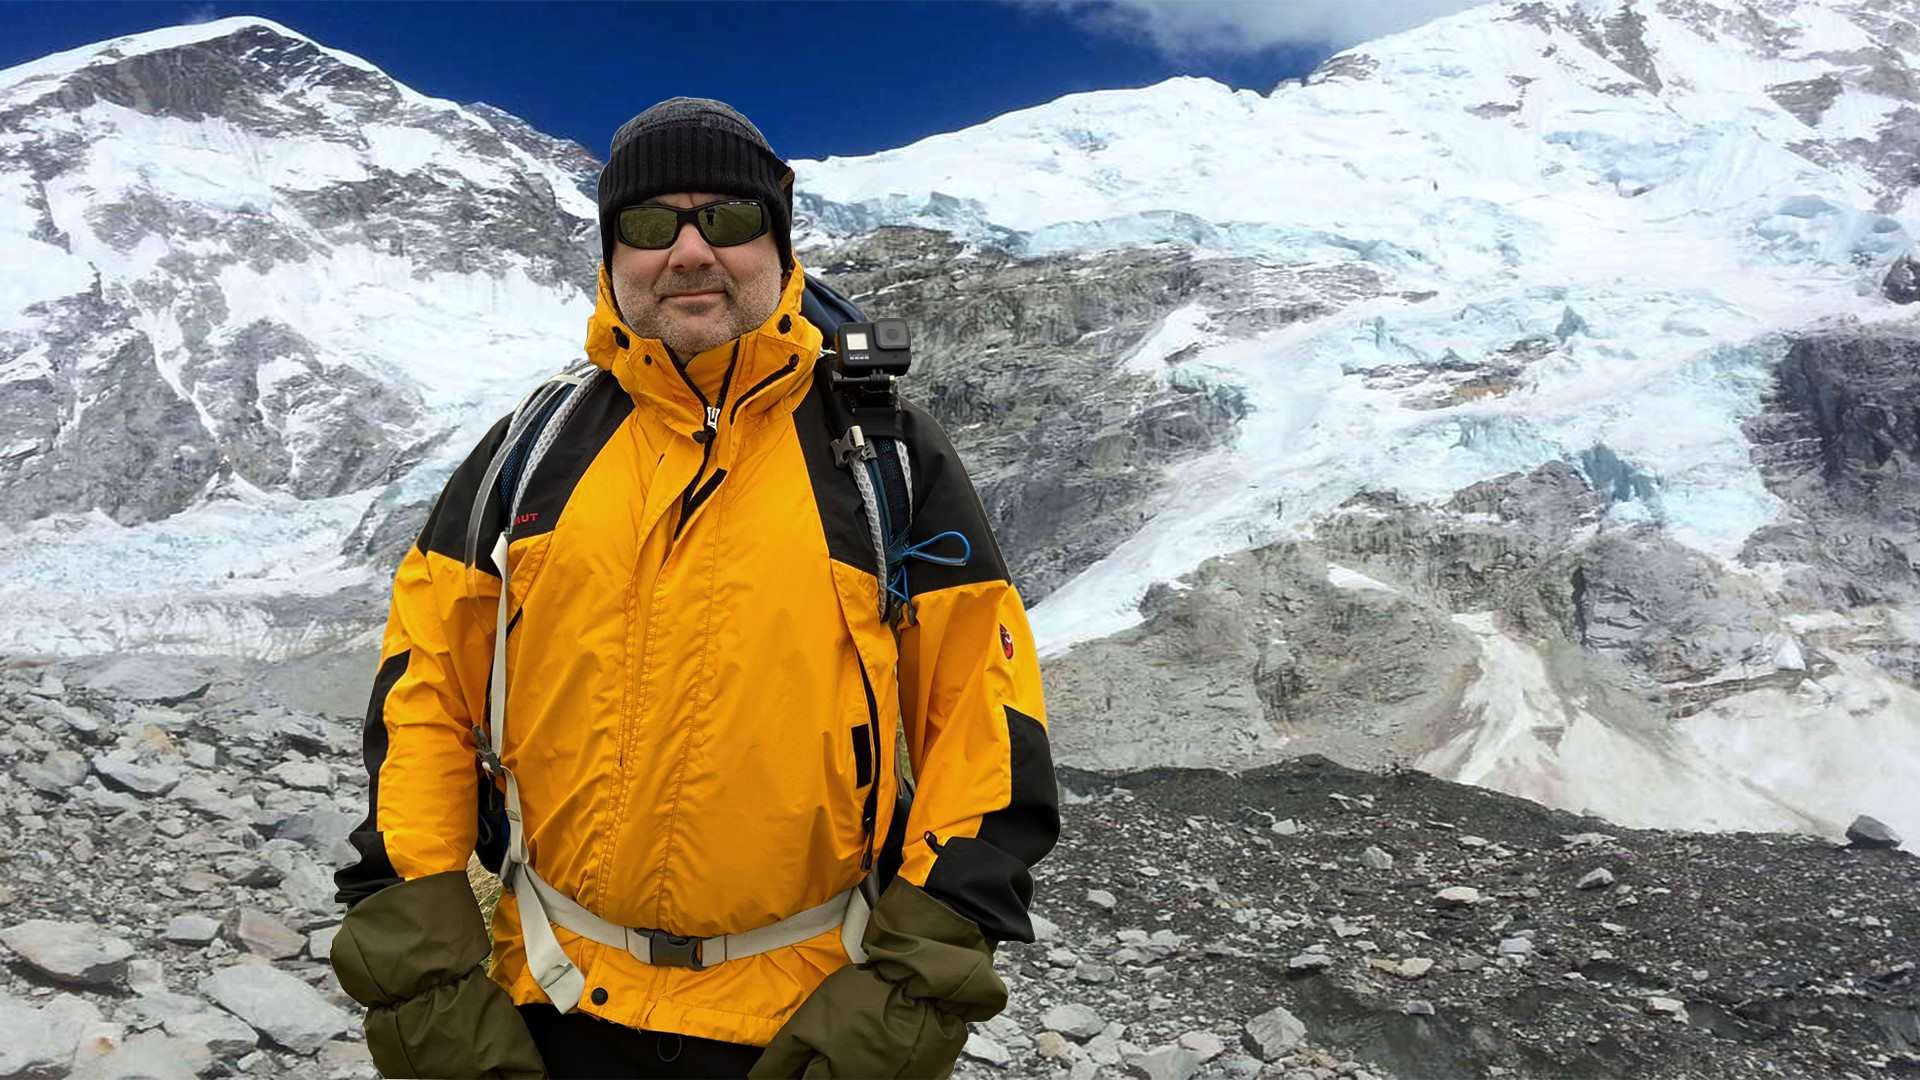 Daz Baldwin, fundraising for YoungMinds by hiking to Everest Basecamp.